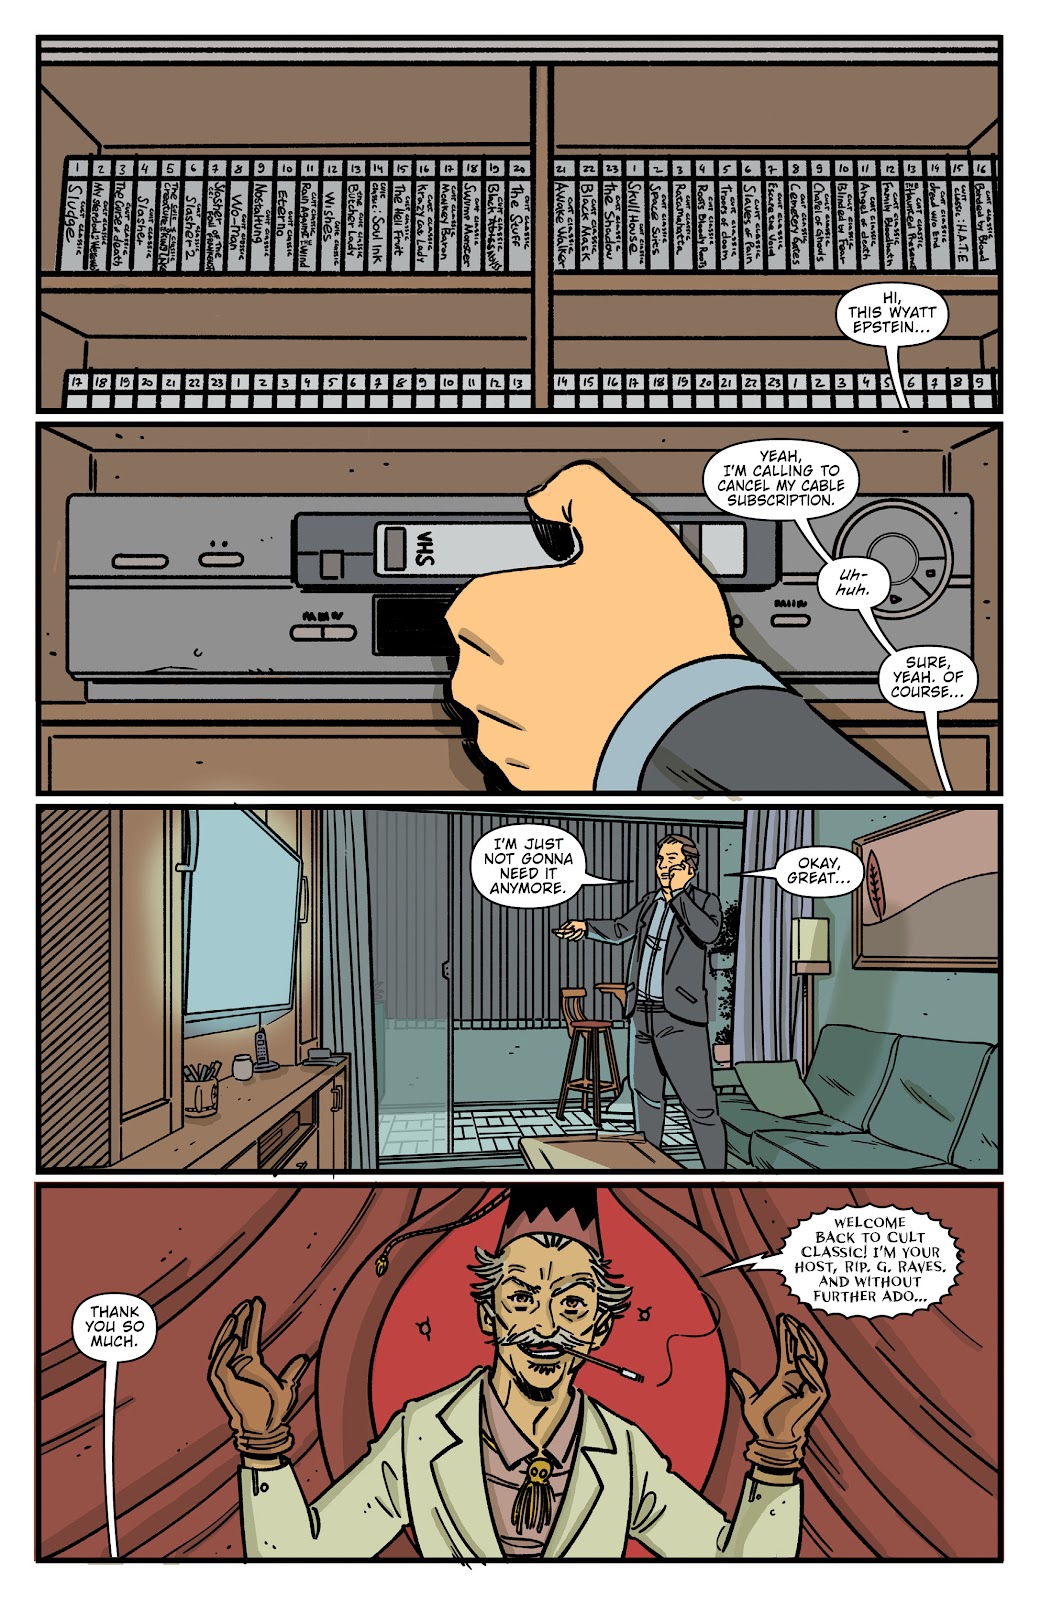 Cult Classic: Return to Whisper issue 4 & 5 - Page 24